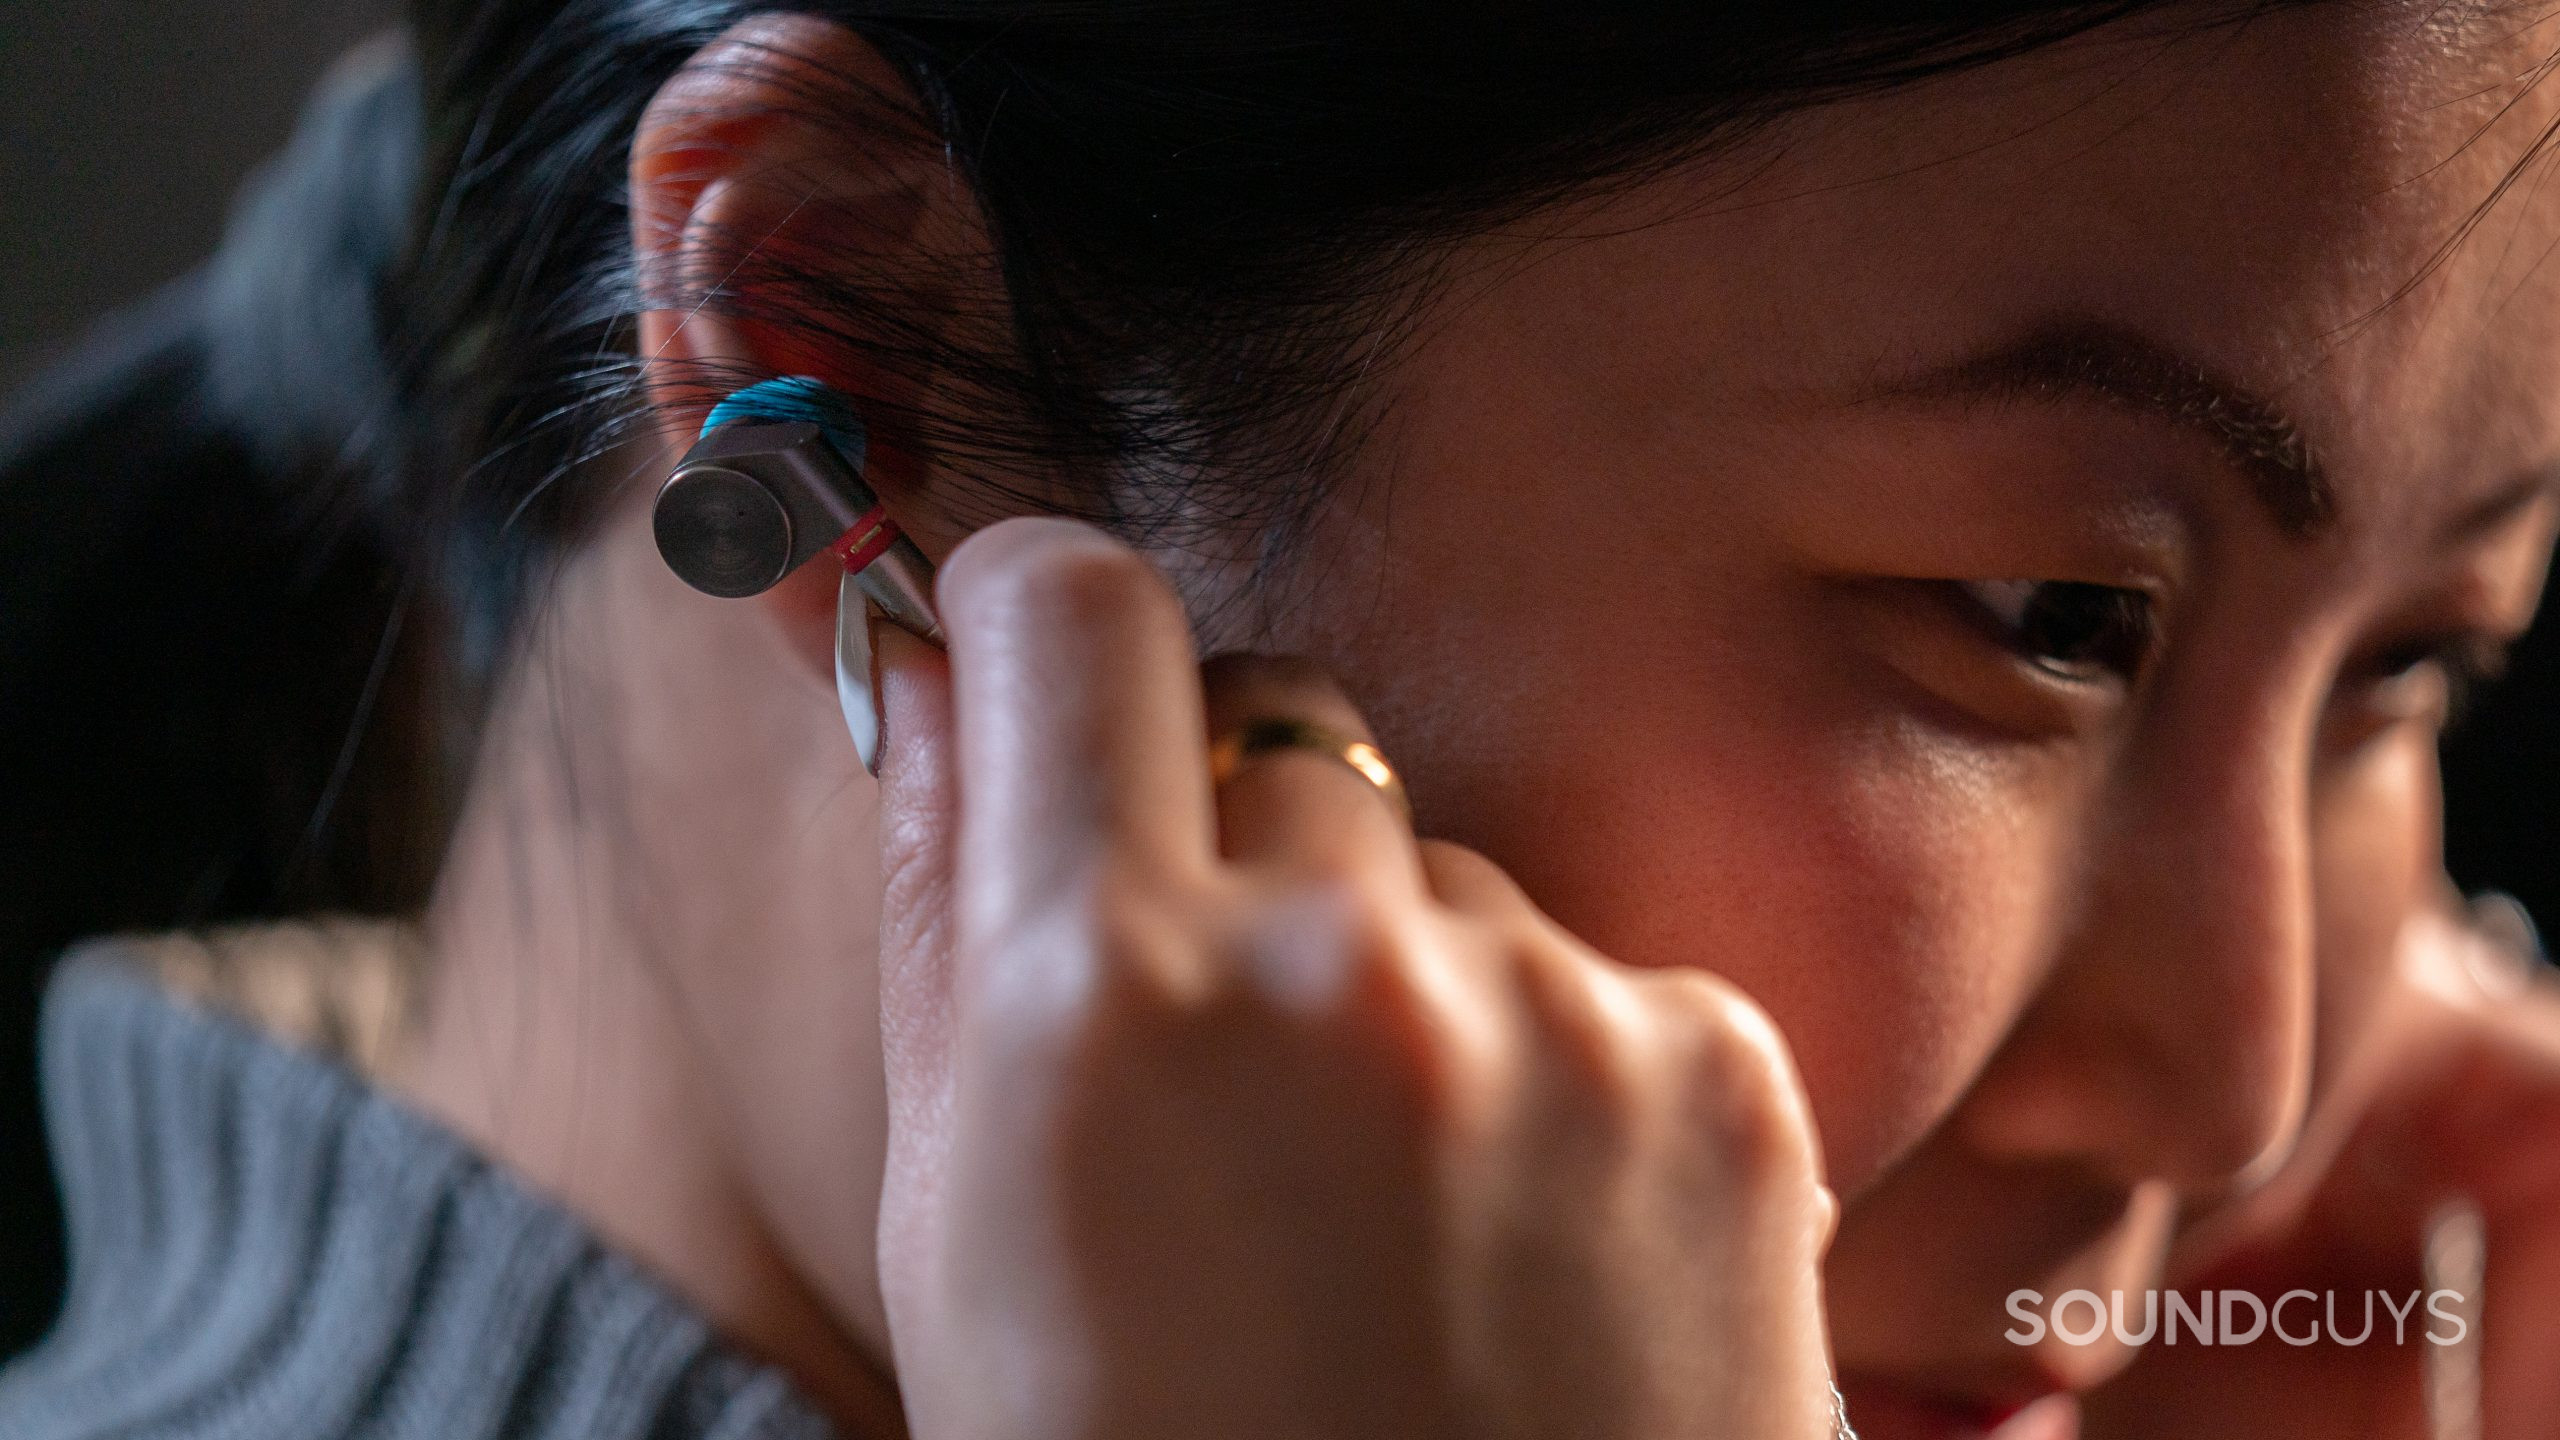 A woman faces left while holding the Linsoul TIN Audio T2 in her ears.